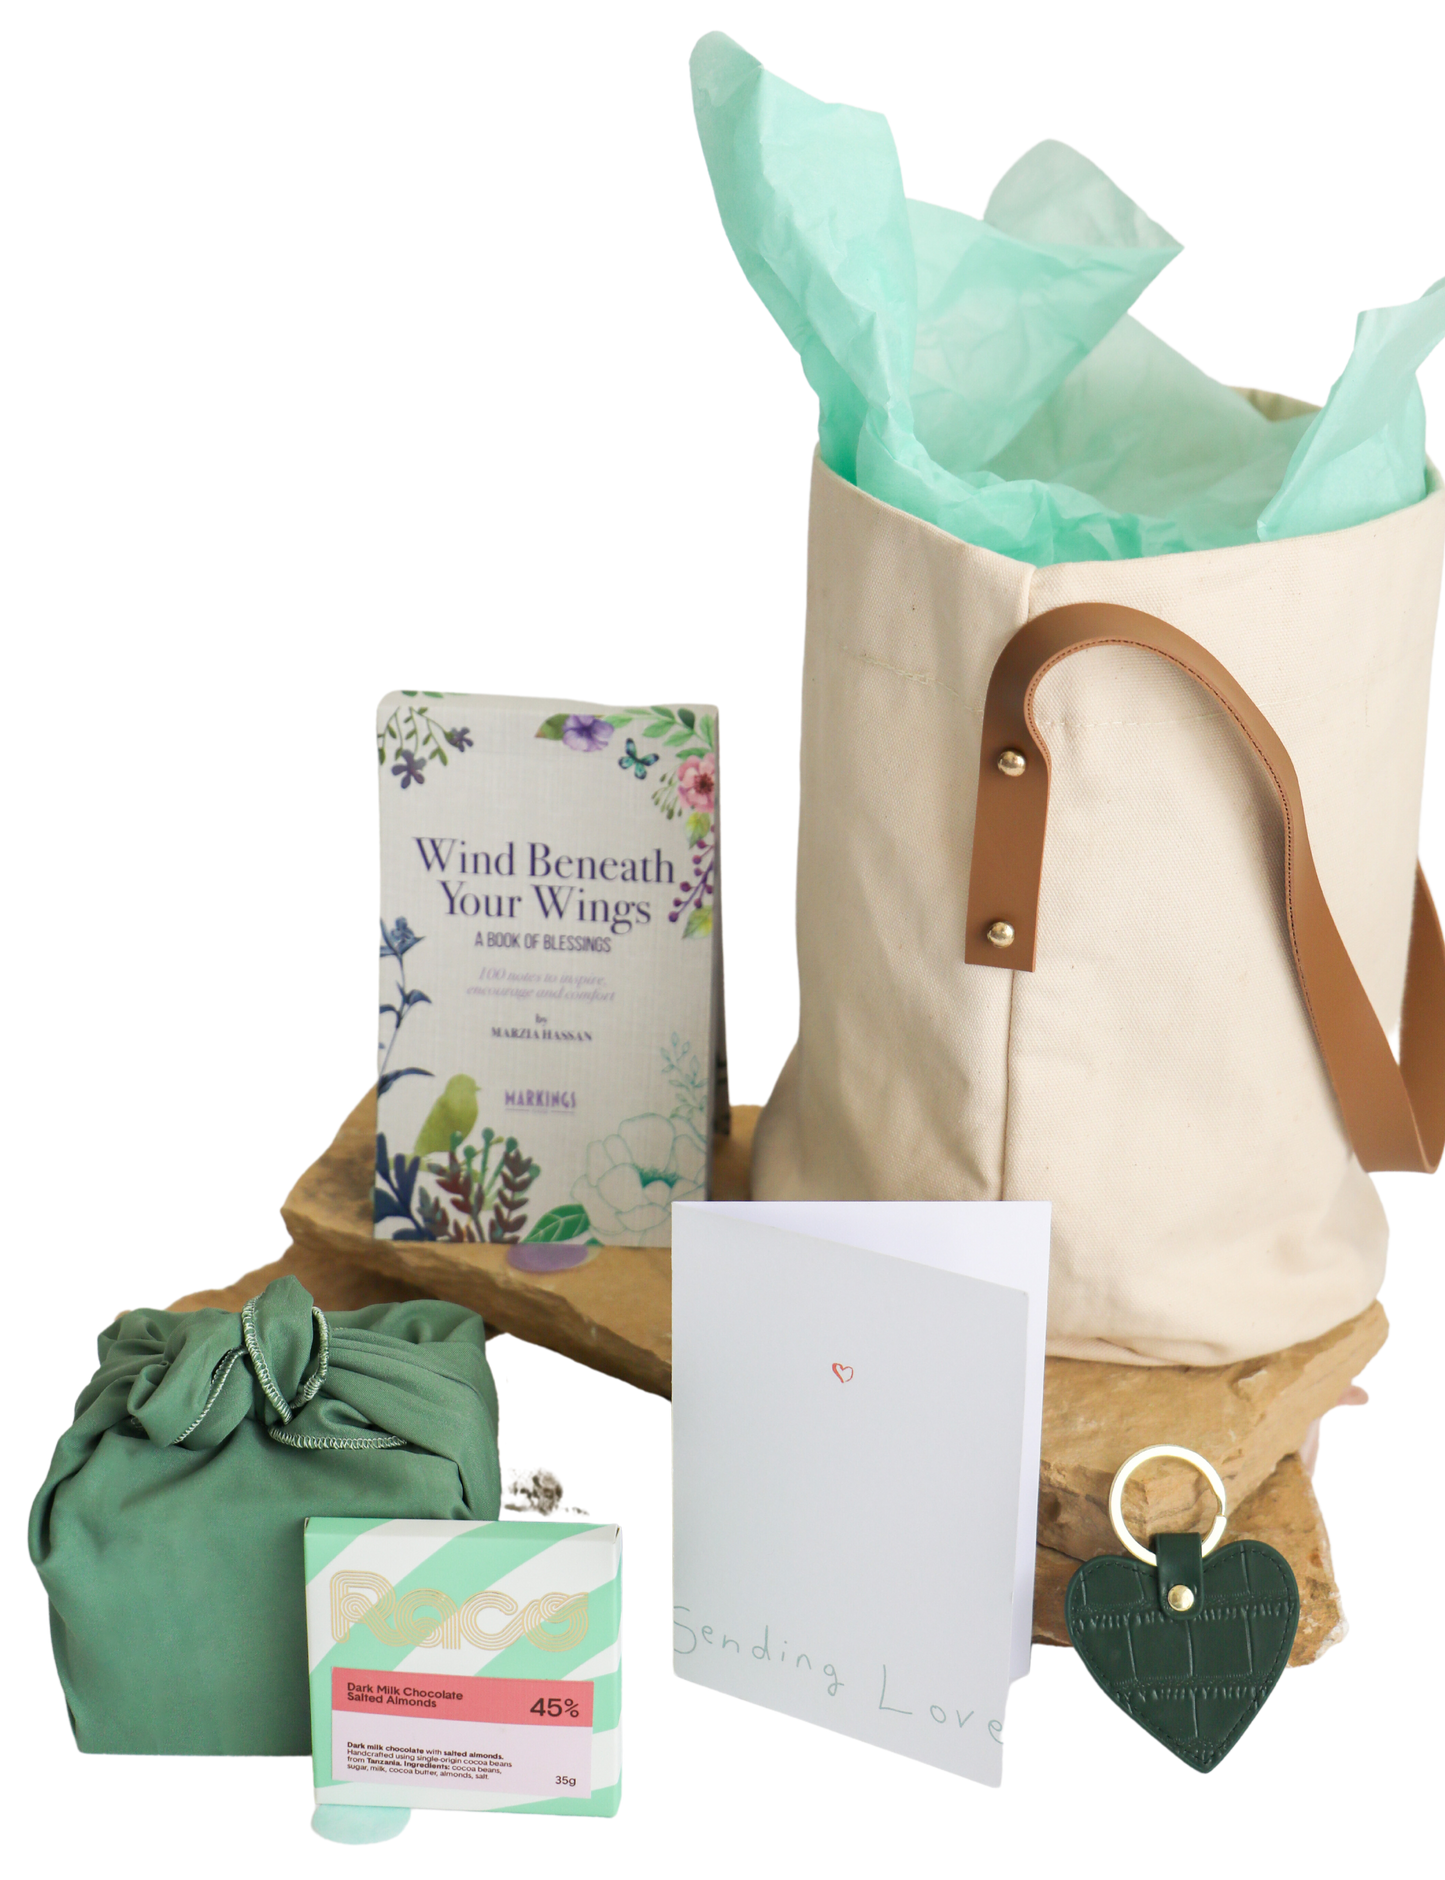 This is the perfect gift hamper for your green-loving friend! Our Tote-ally Green tote comes filled to the brim with goodies all in shades of green. Treat yourself or a friend to a bag full of green goodies!